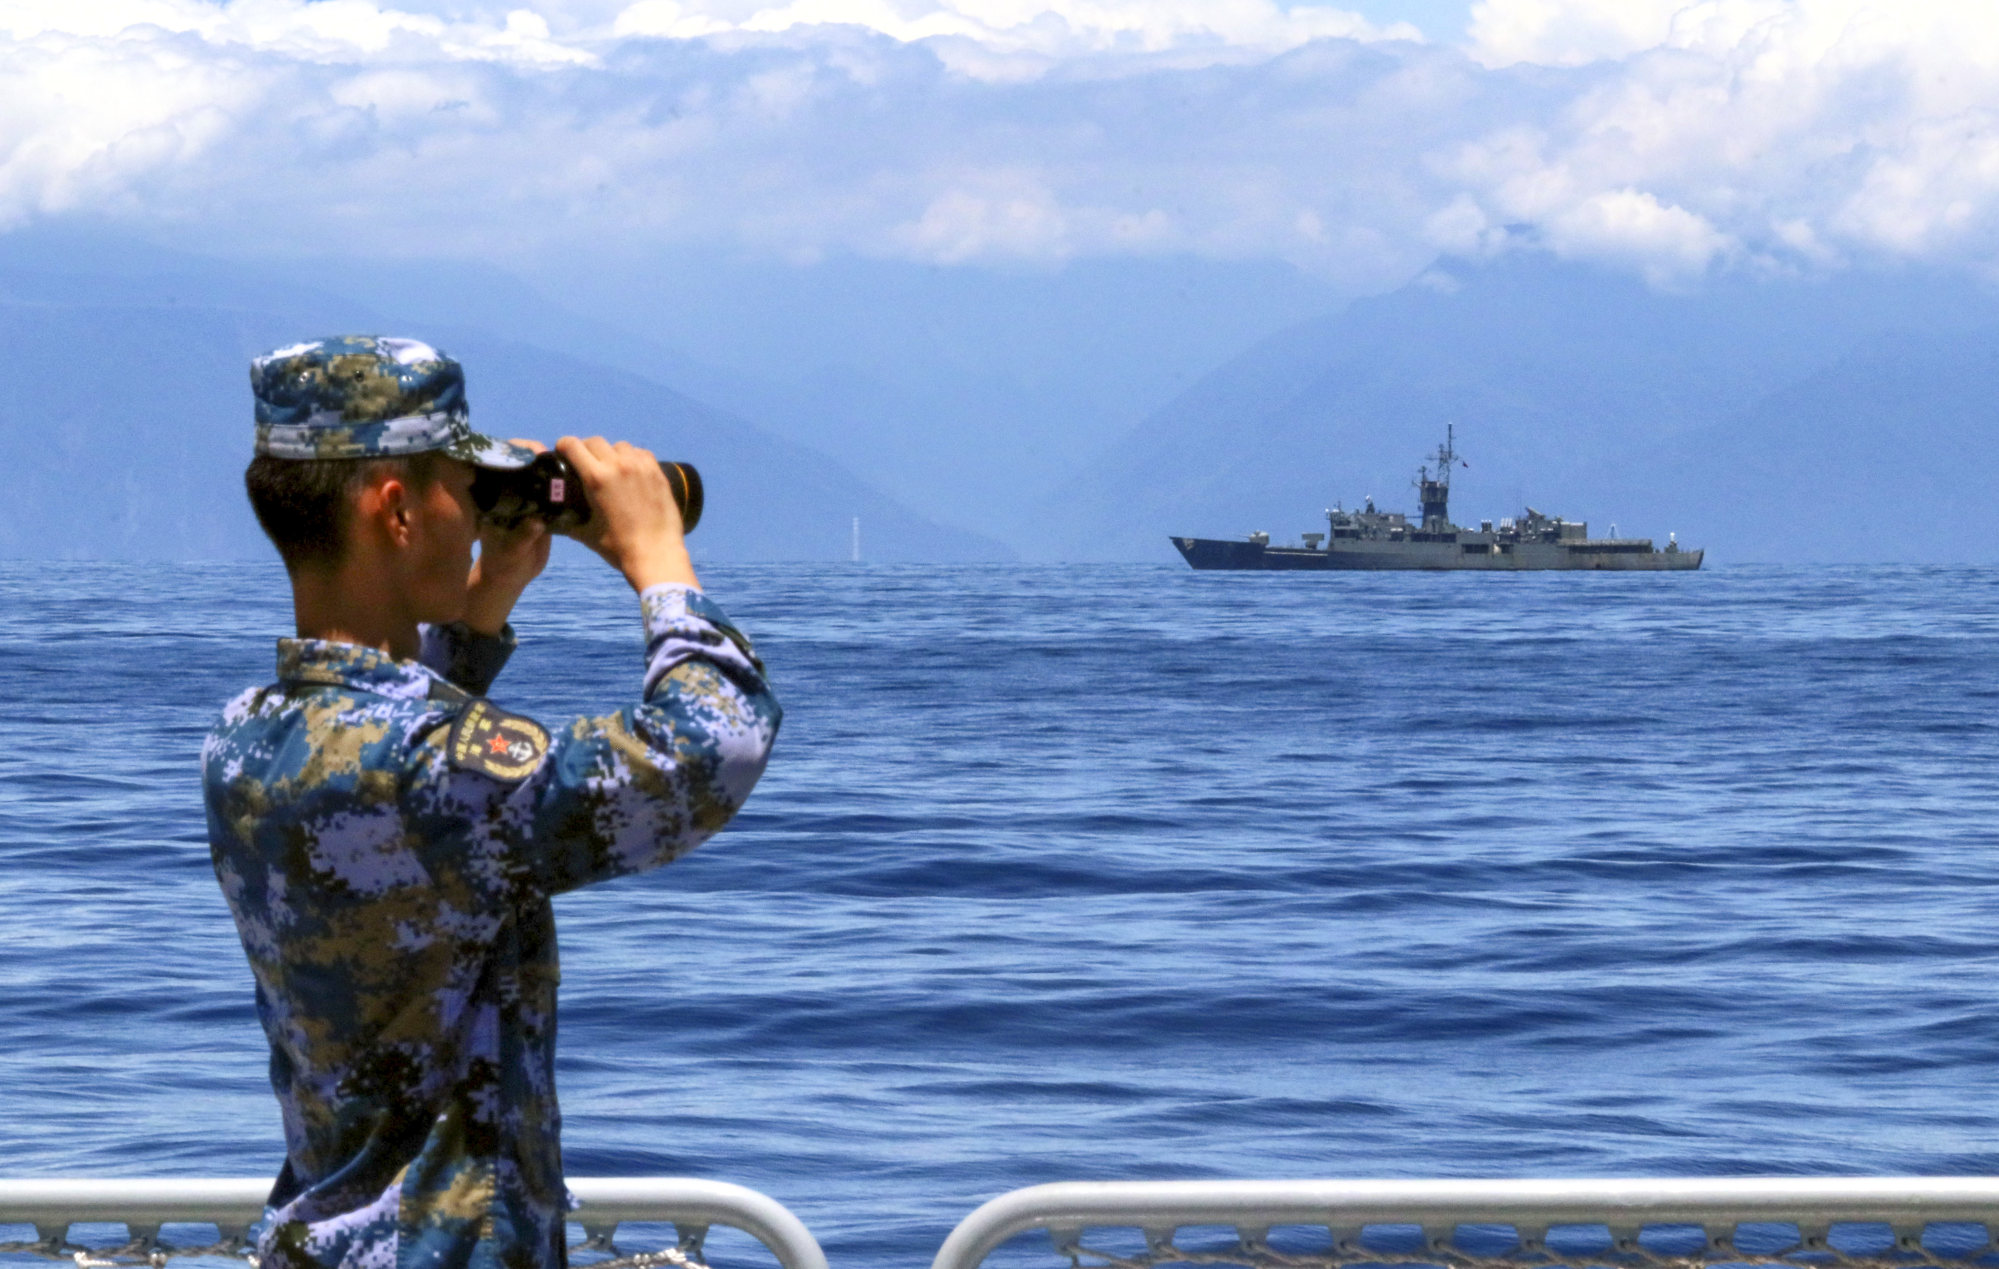 Tensions have escalated across the Taiwan Strait, which separates the island from mainland China. Photo: Xinhua